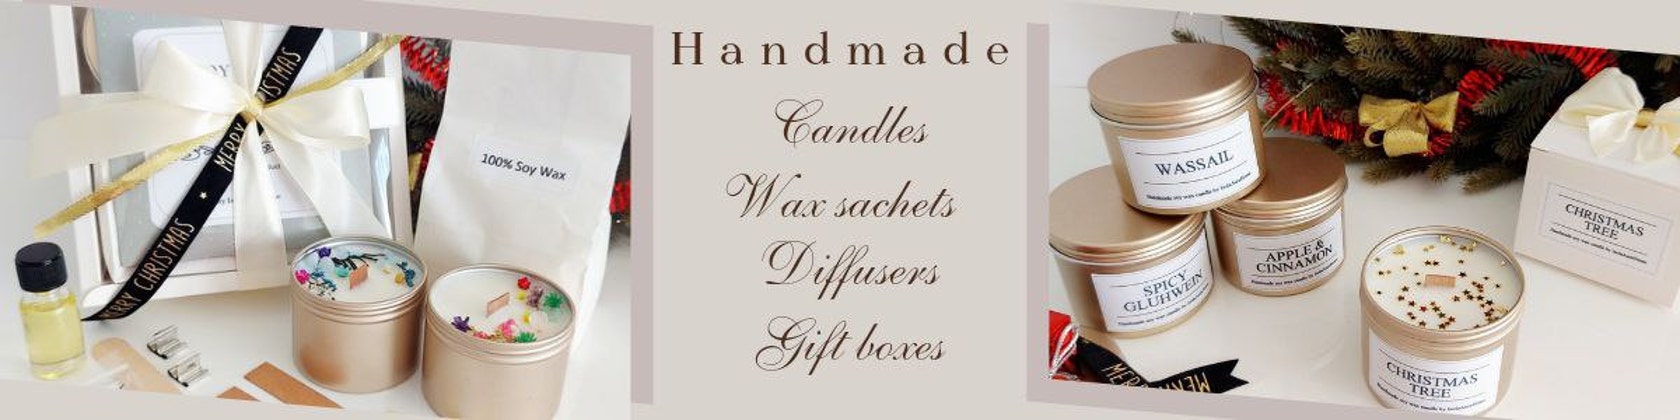 DIY Candle Making Kit, Soy Candle Making Kit, Make Your Own Candle, Do It  Yourself Craft Kit, How to Make Candles, Xmas Gift for Friend 